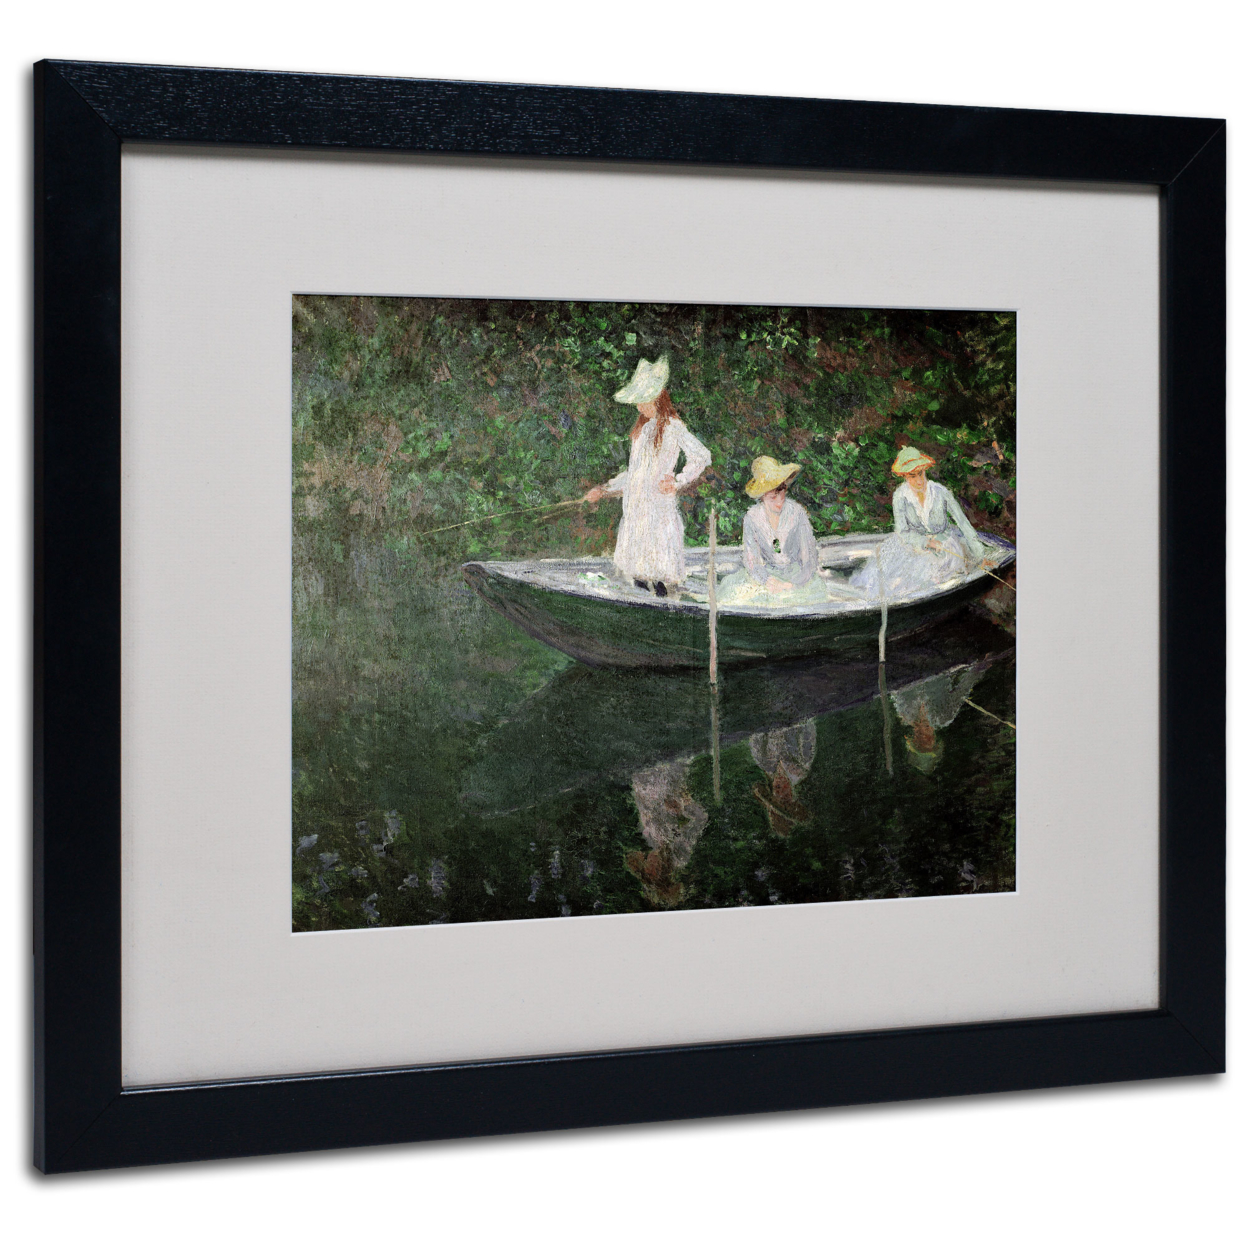 Claude Monet 'The Boat At Giverny' Black Wooden Framed Art 18 X 22 Inches